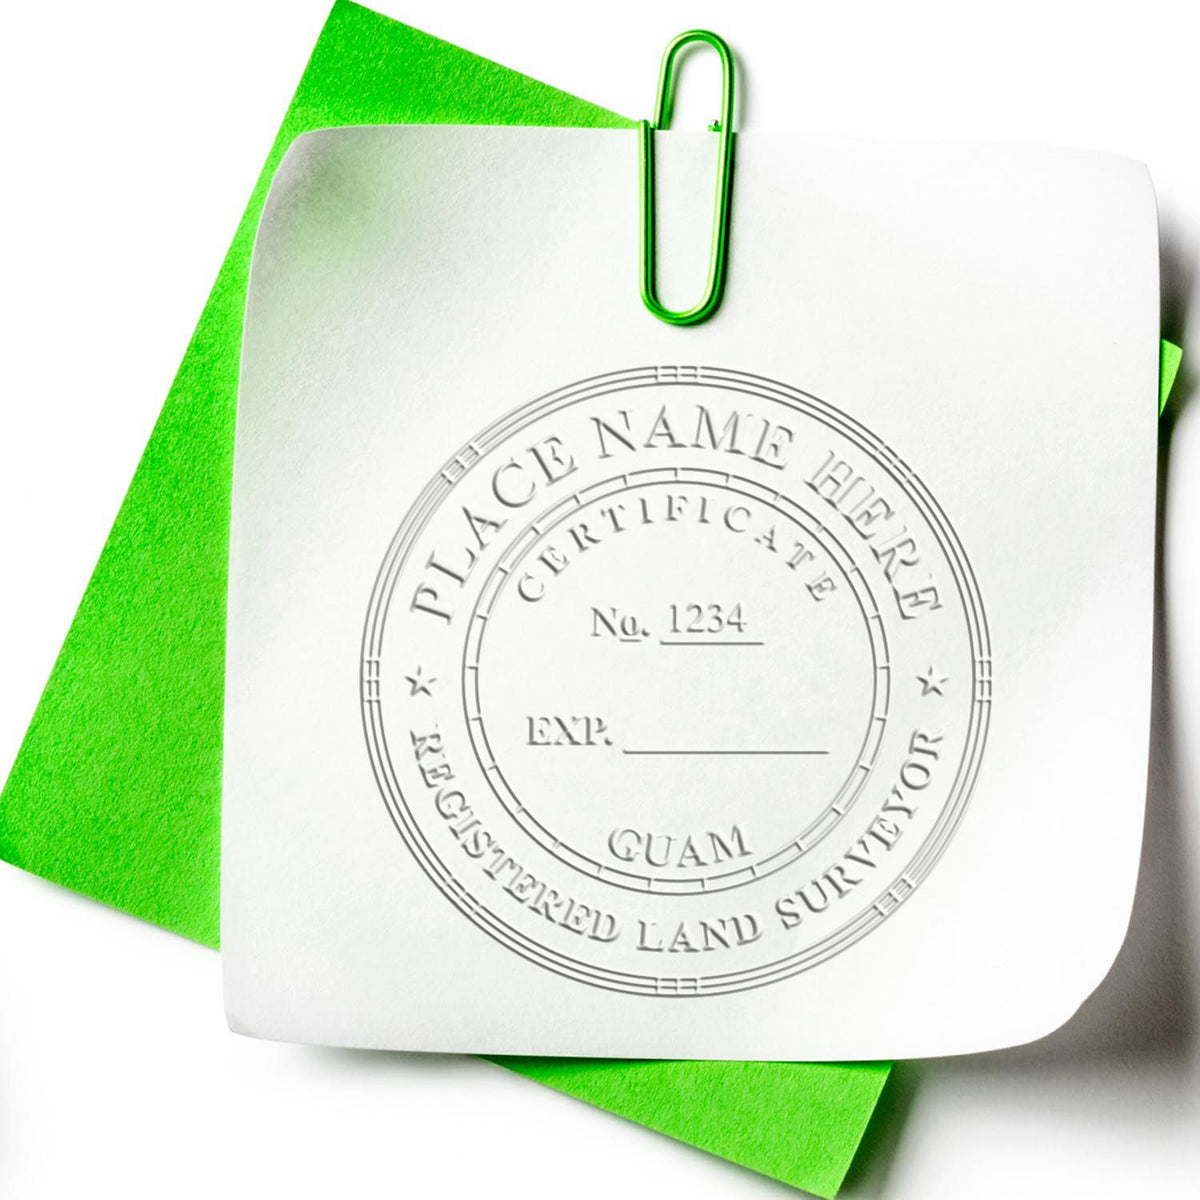 The Gift Guam Land Surveyor Seal stamp impression comes to life with a crisp, detailed image stamped on paper - showcasing true professional quality.